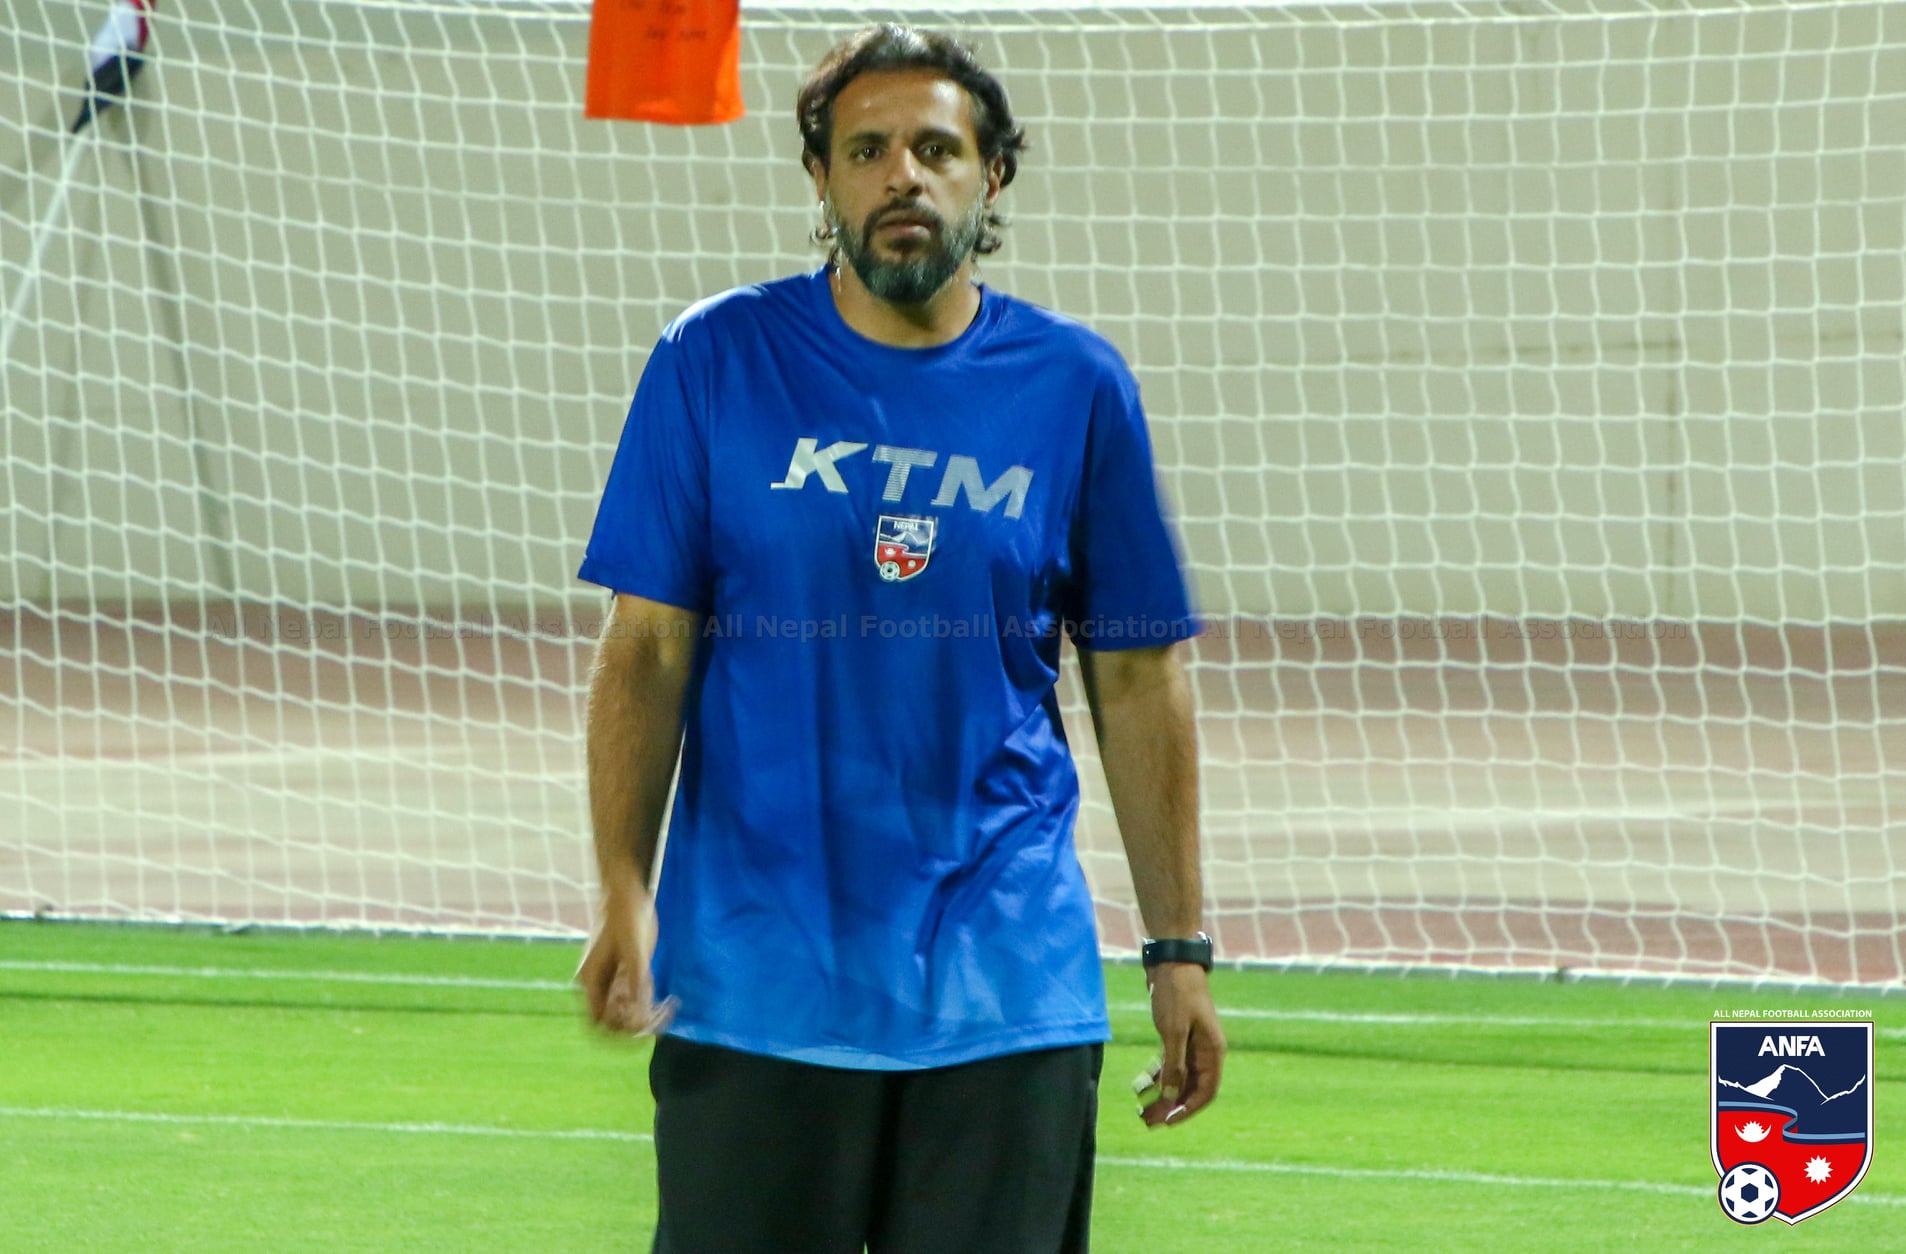 SAFF has done injustice by suspending me in final: Coach Almutairi